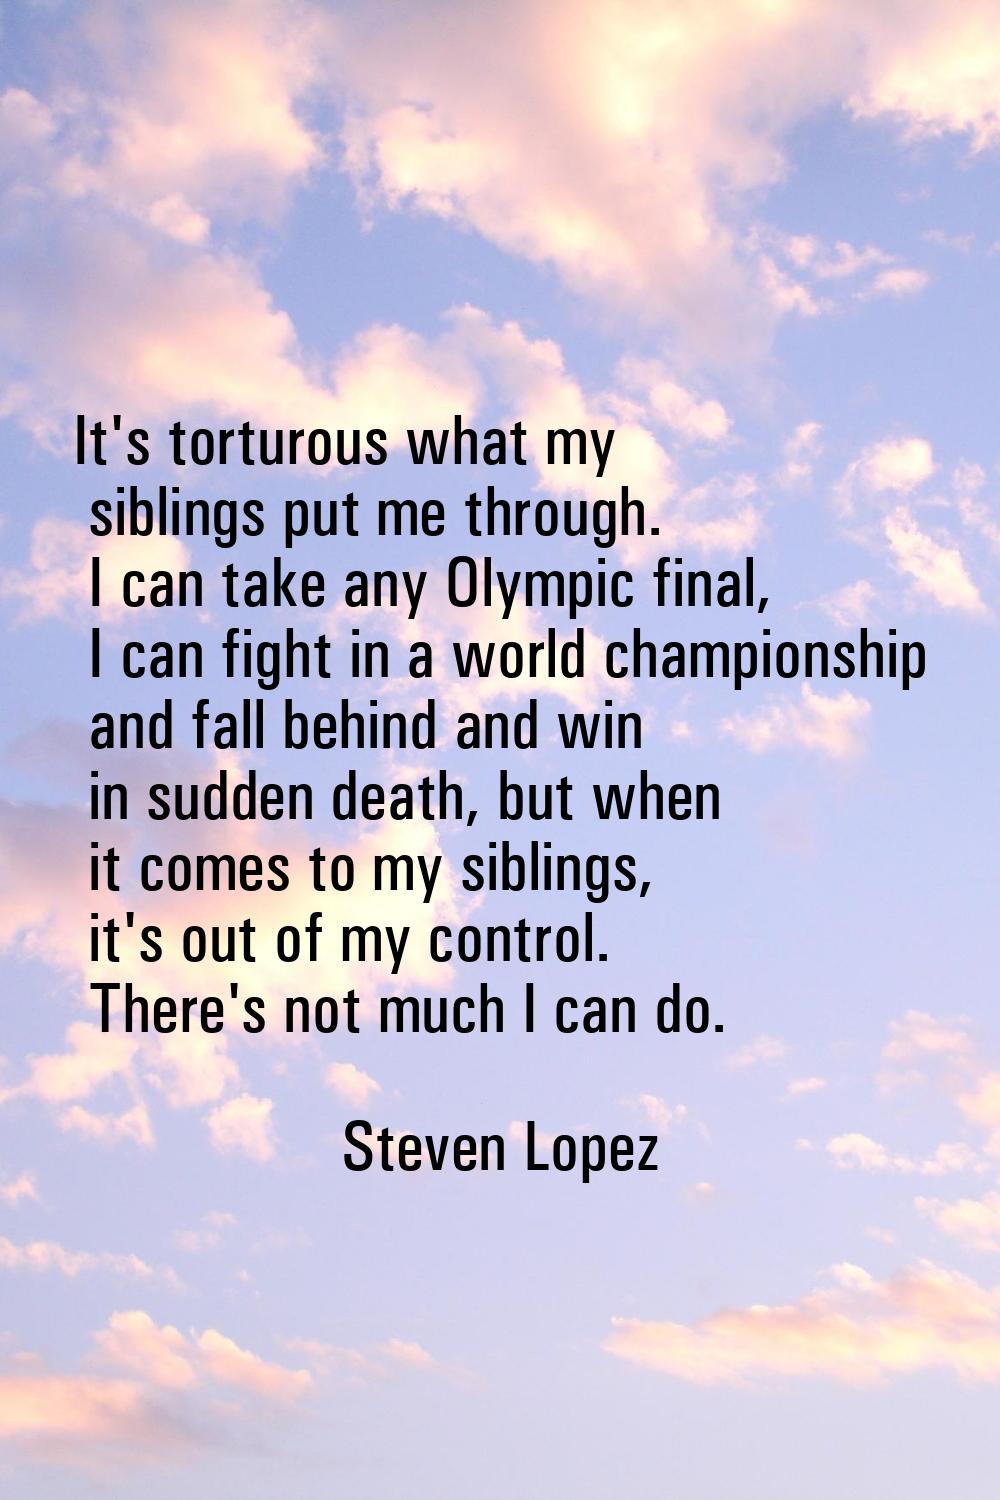 It's torturous what my siblings put me through. I can take any Olympic final, I can fight in a worl